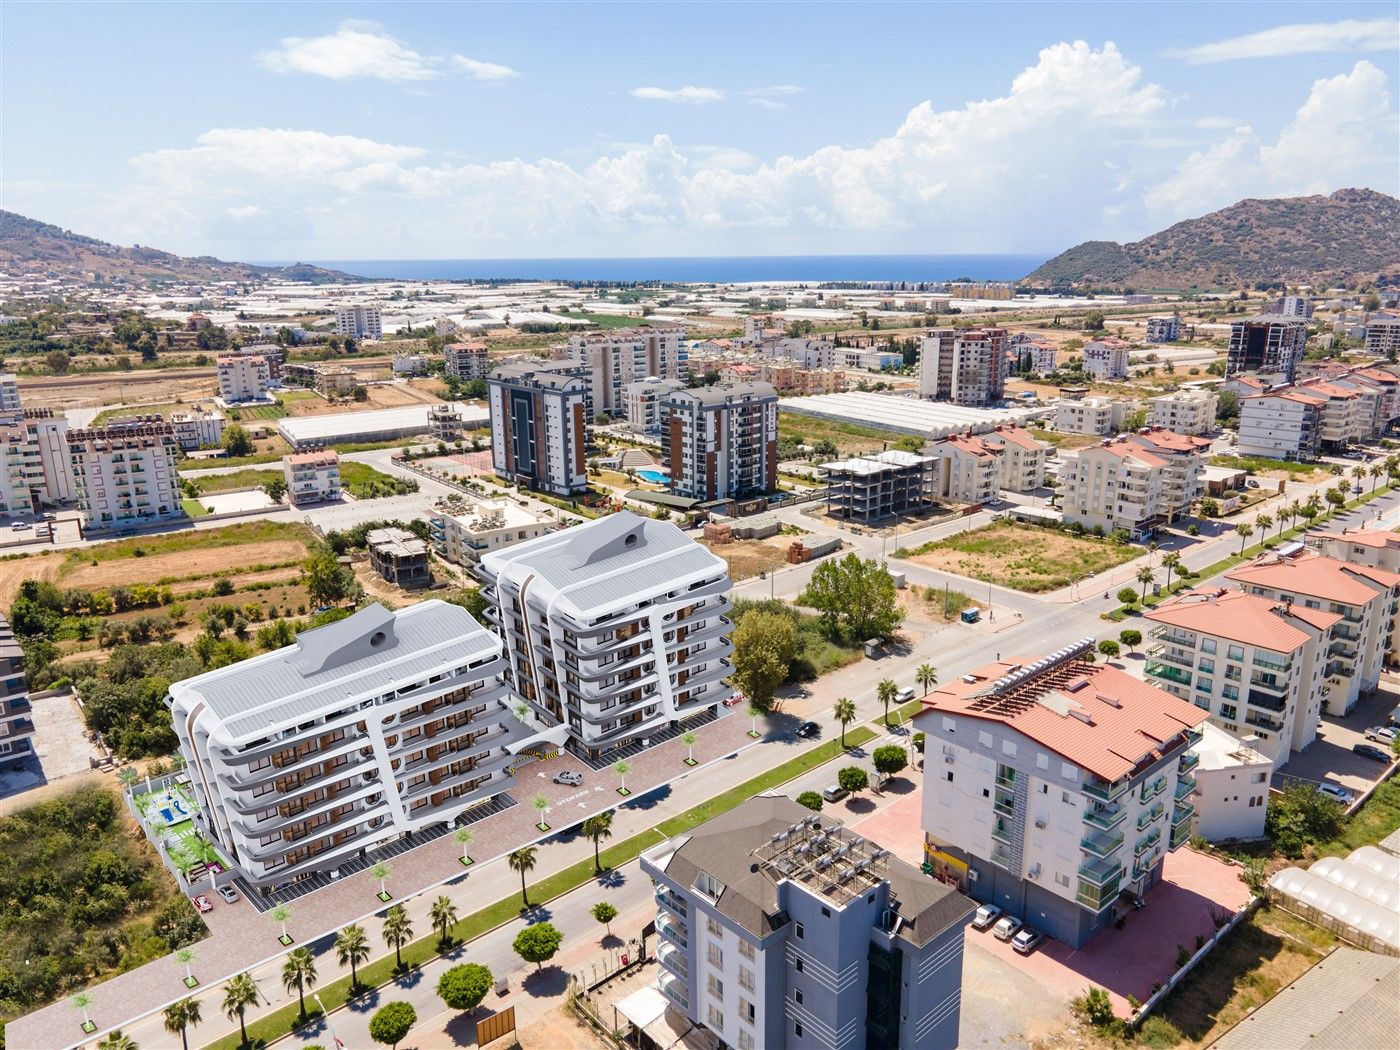 Project of a residential complex in the central part of the Gazipasha city